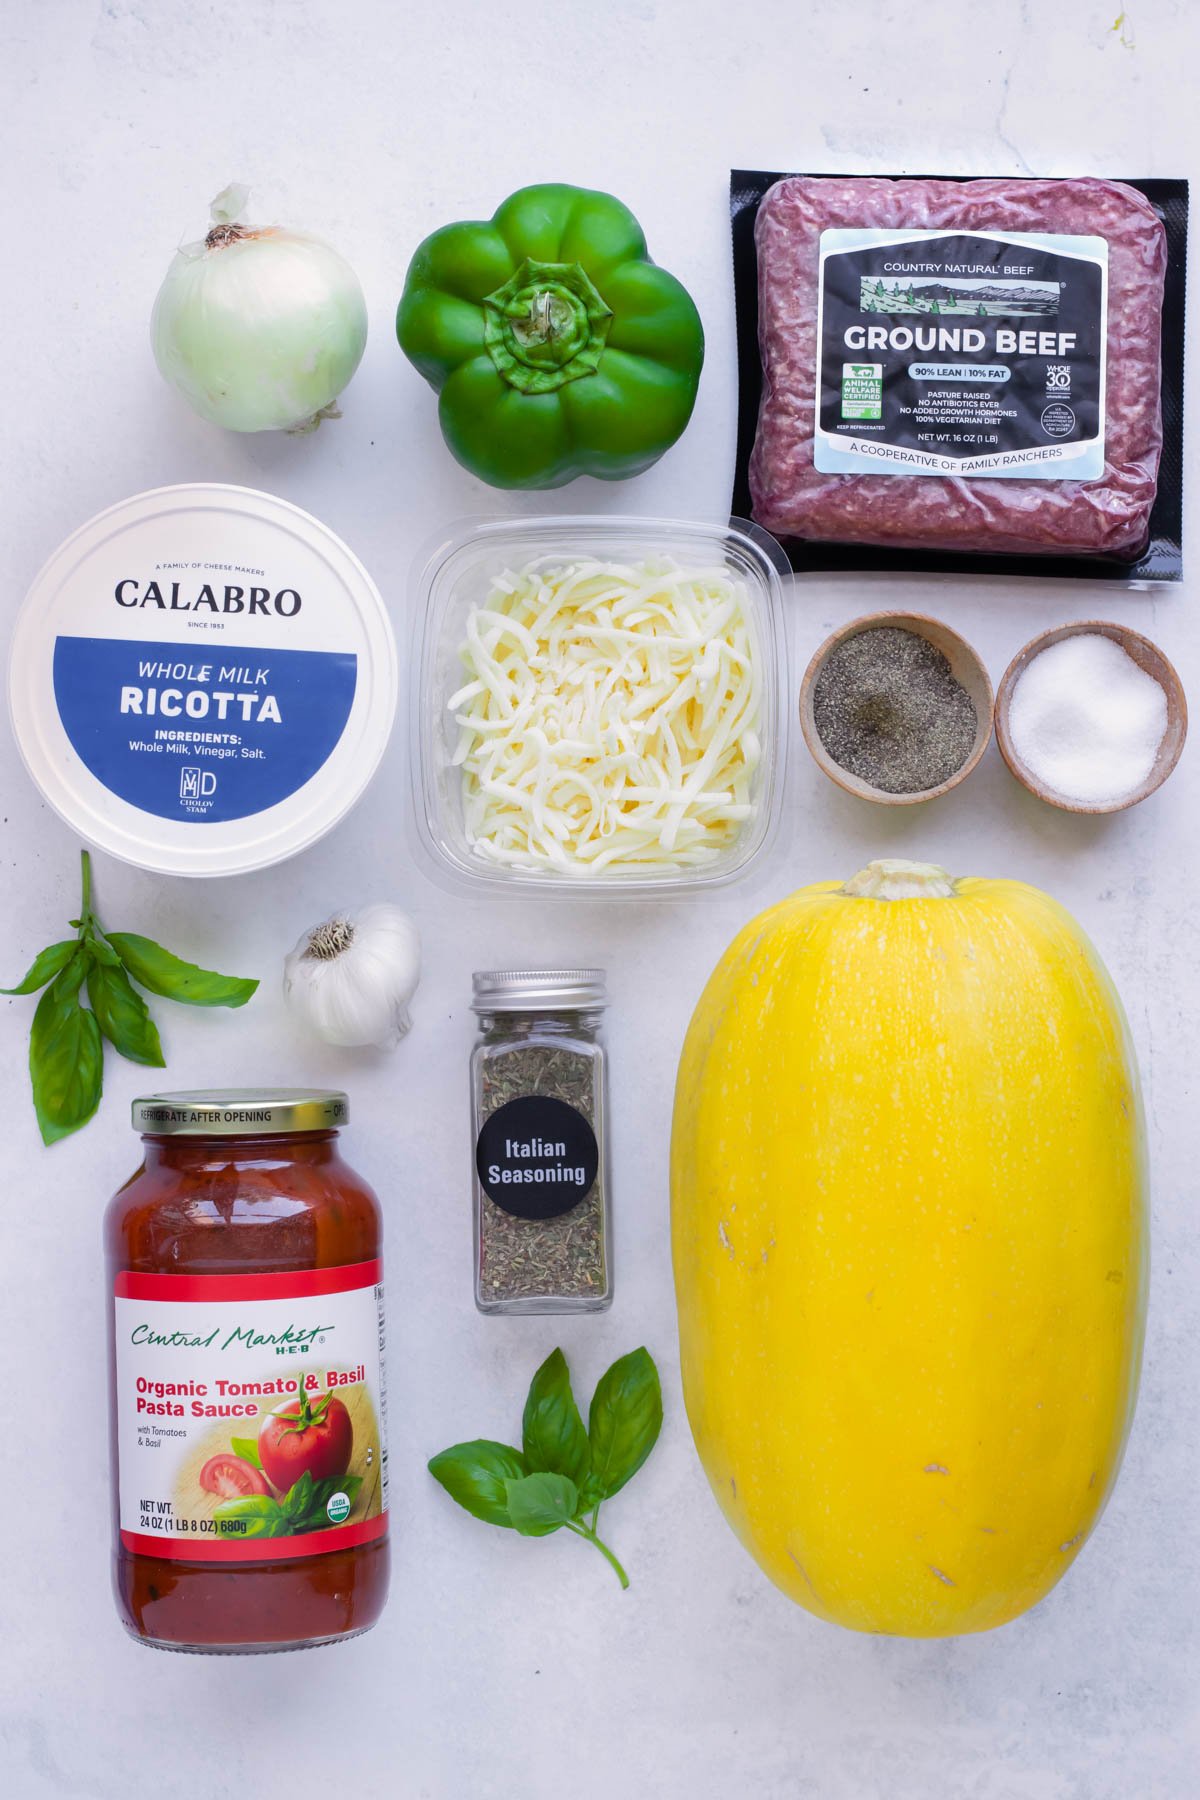 Spaghetti squash, ricotta, parmesan cheese, ground turkey, basil, tomato sauce, and other ingredients are used in this low-carb recipe.